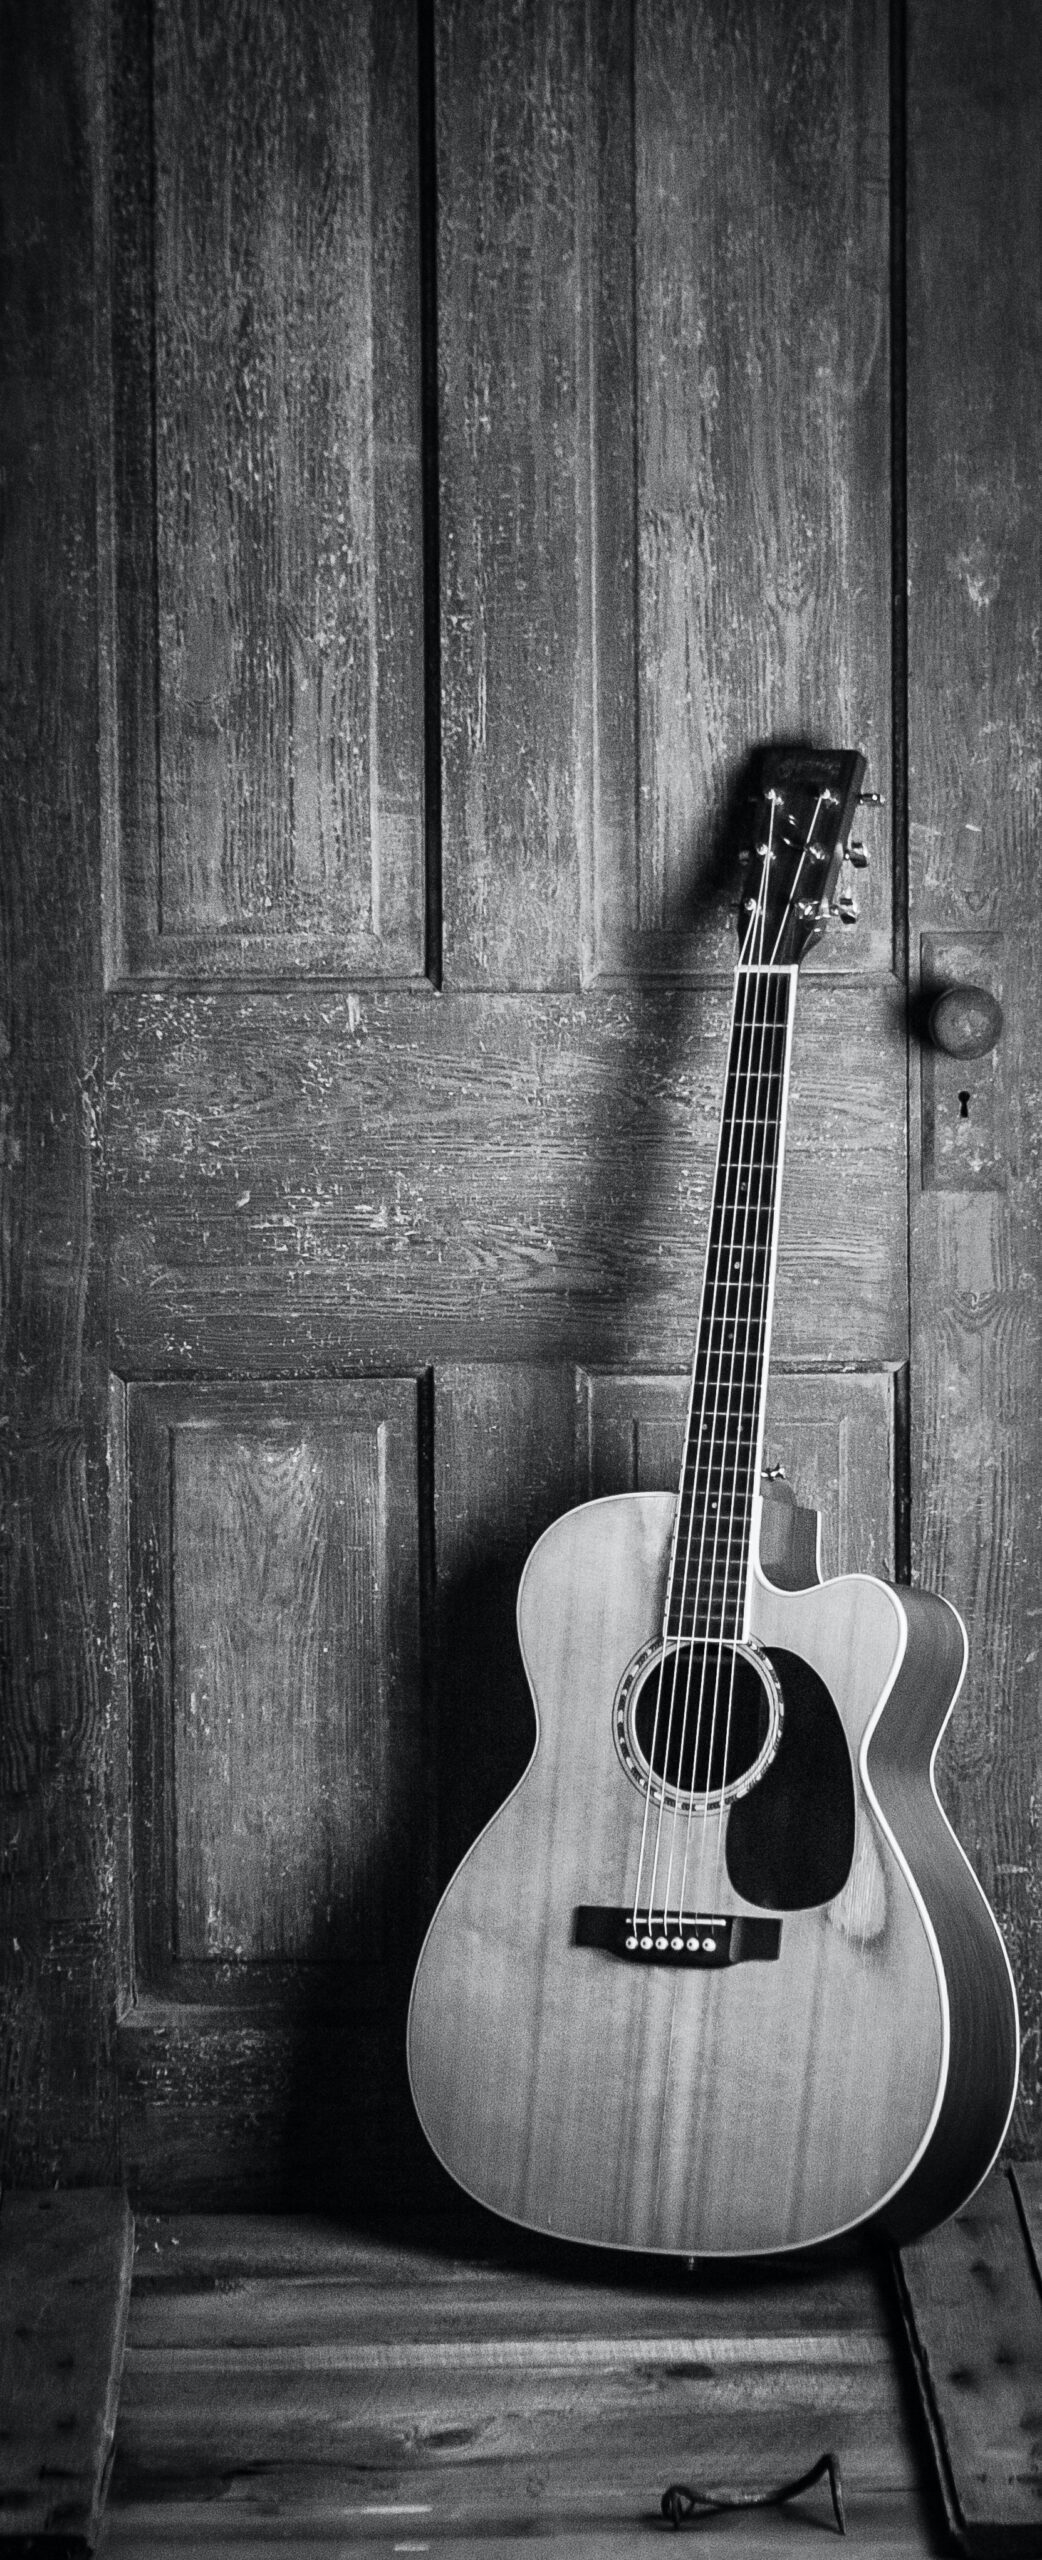 Guitar leaning against door picture in black & white